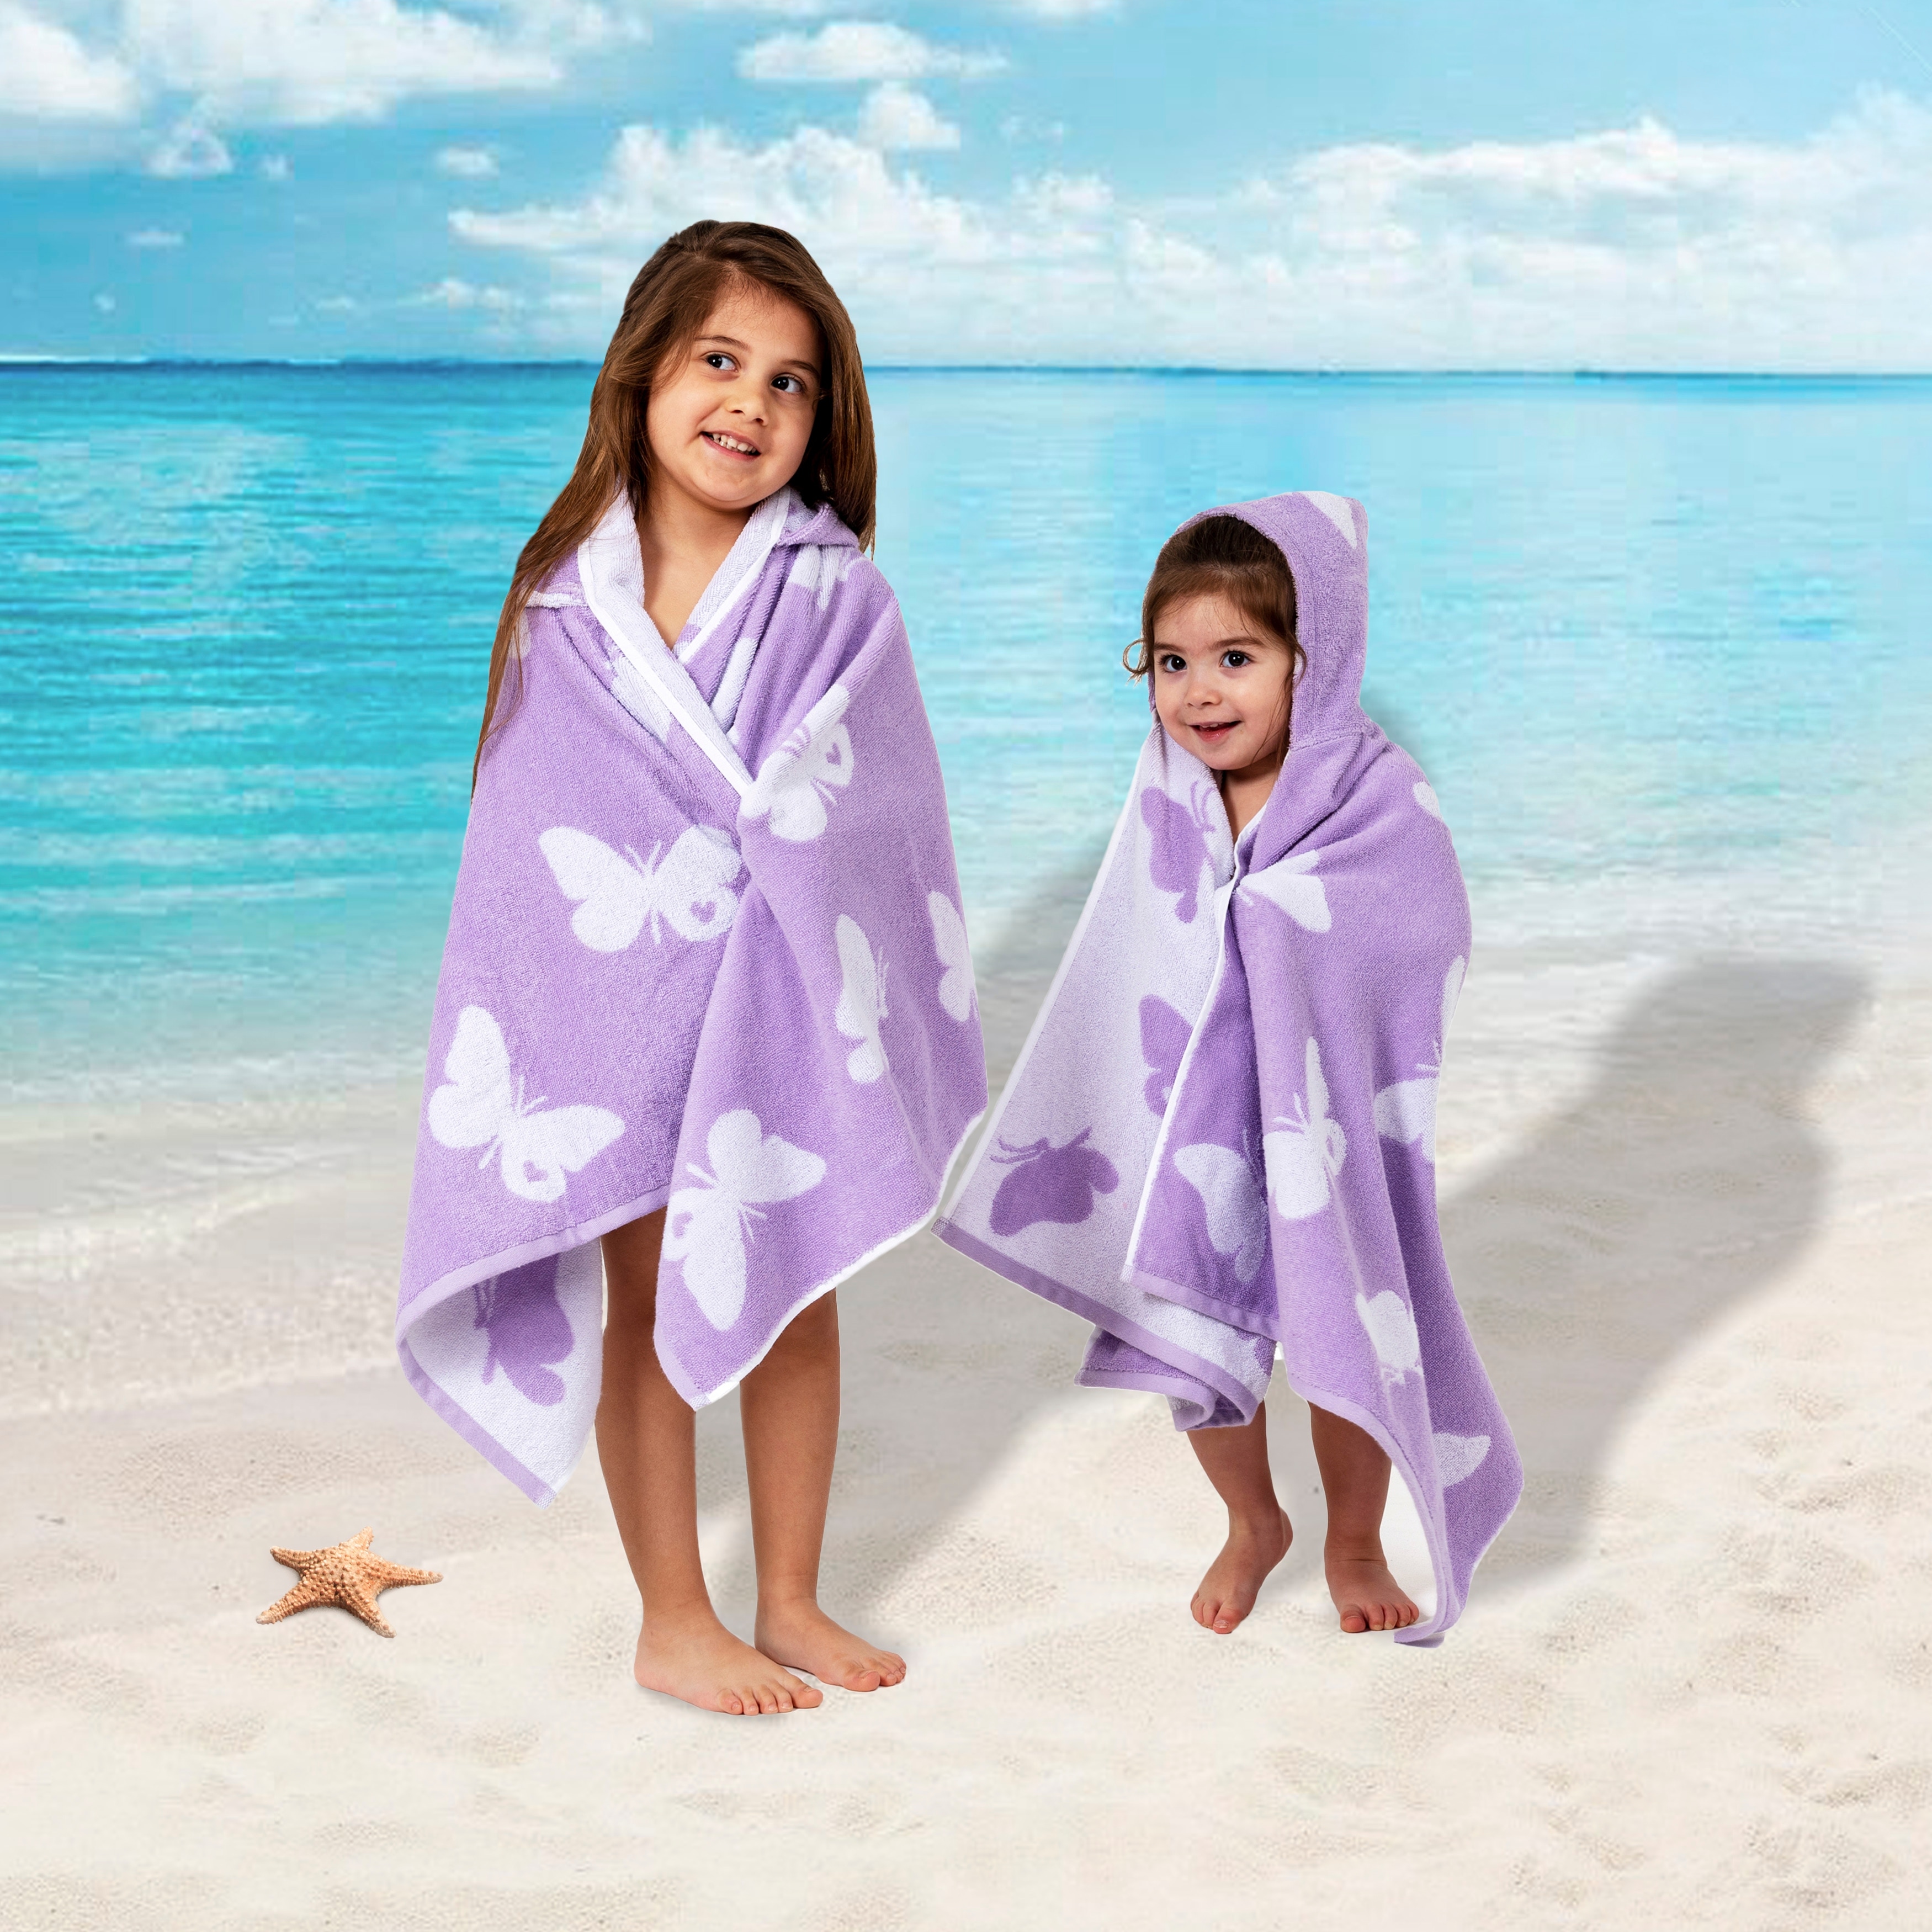 https://ak1.ostkcdn.com/images/products/is/images/direct/9fc3eecd6e525a480e005ae137c3c81360fe137d/Sweet-Kids-Turkish-Aegean-Cotton-Hooded-Bath-and-Beach-Towel-Wrap.jpg